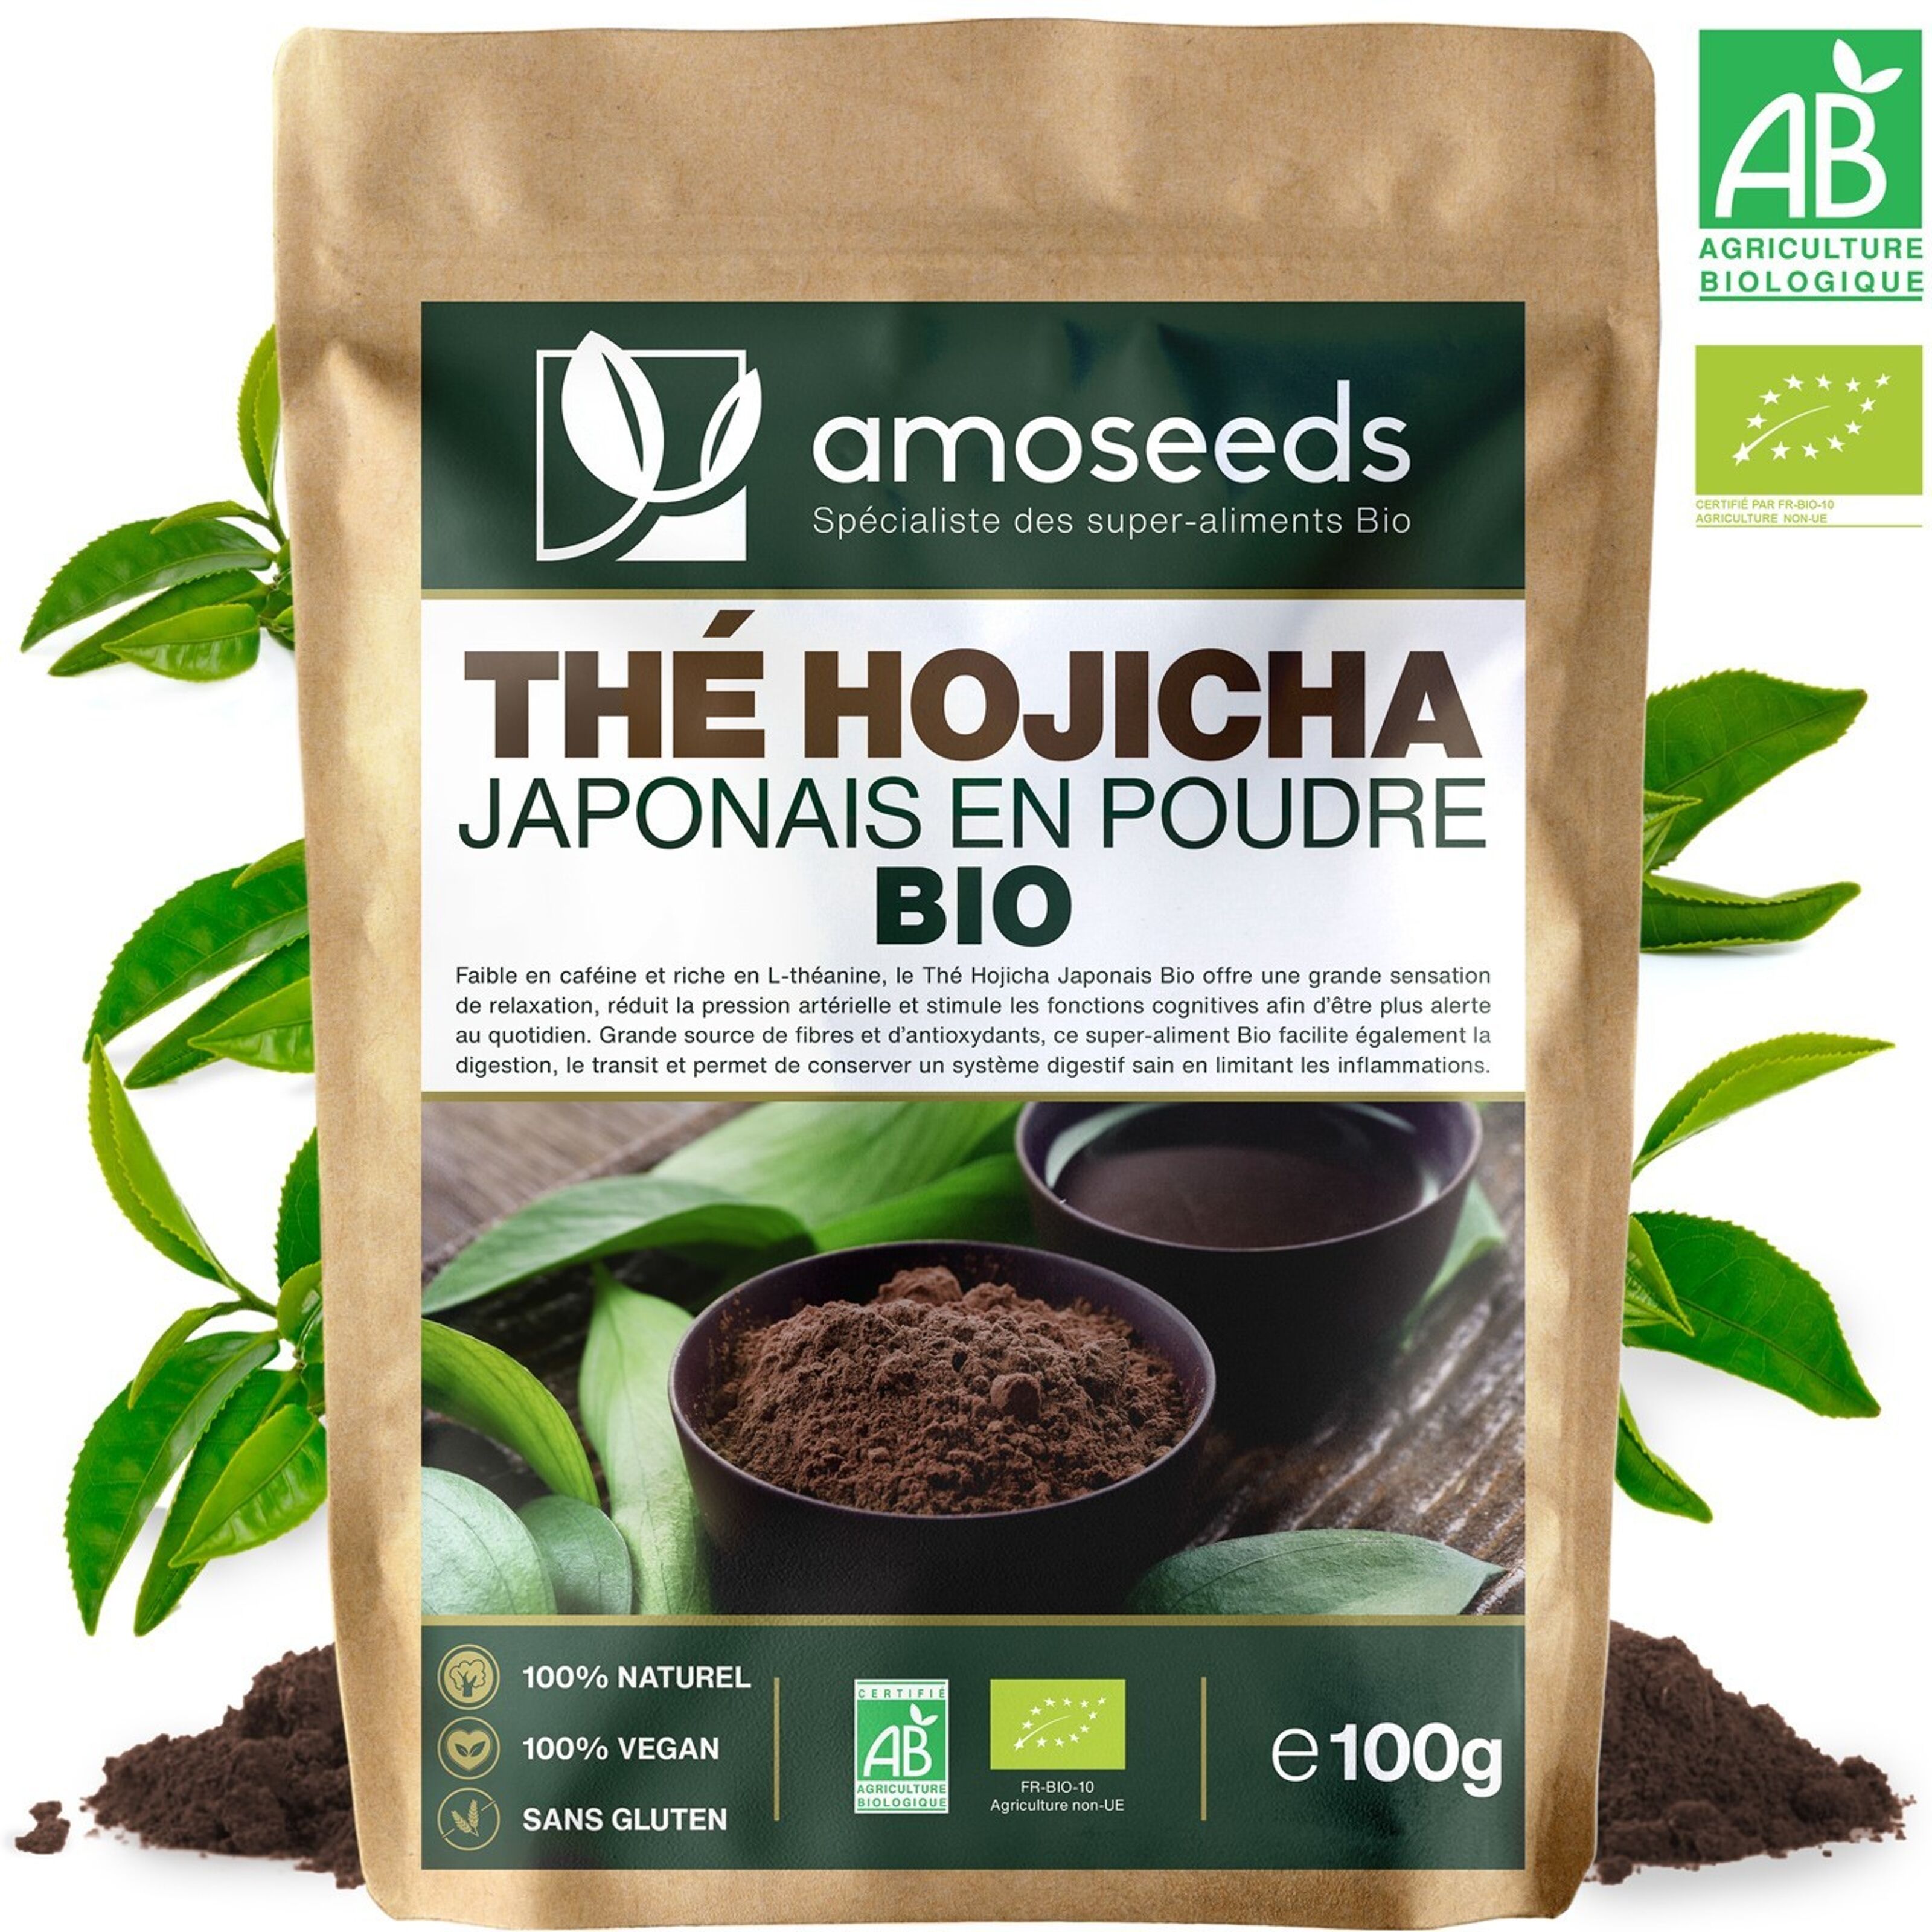 Amoseeds wholesale products